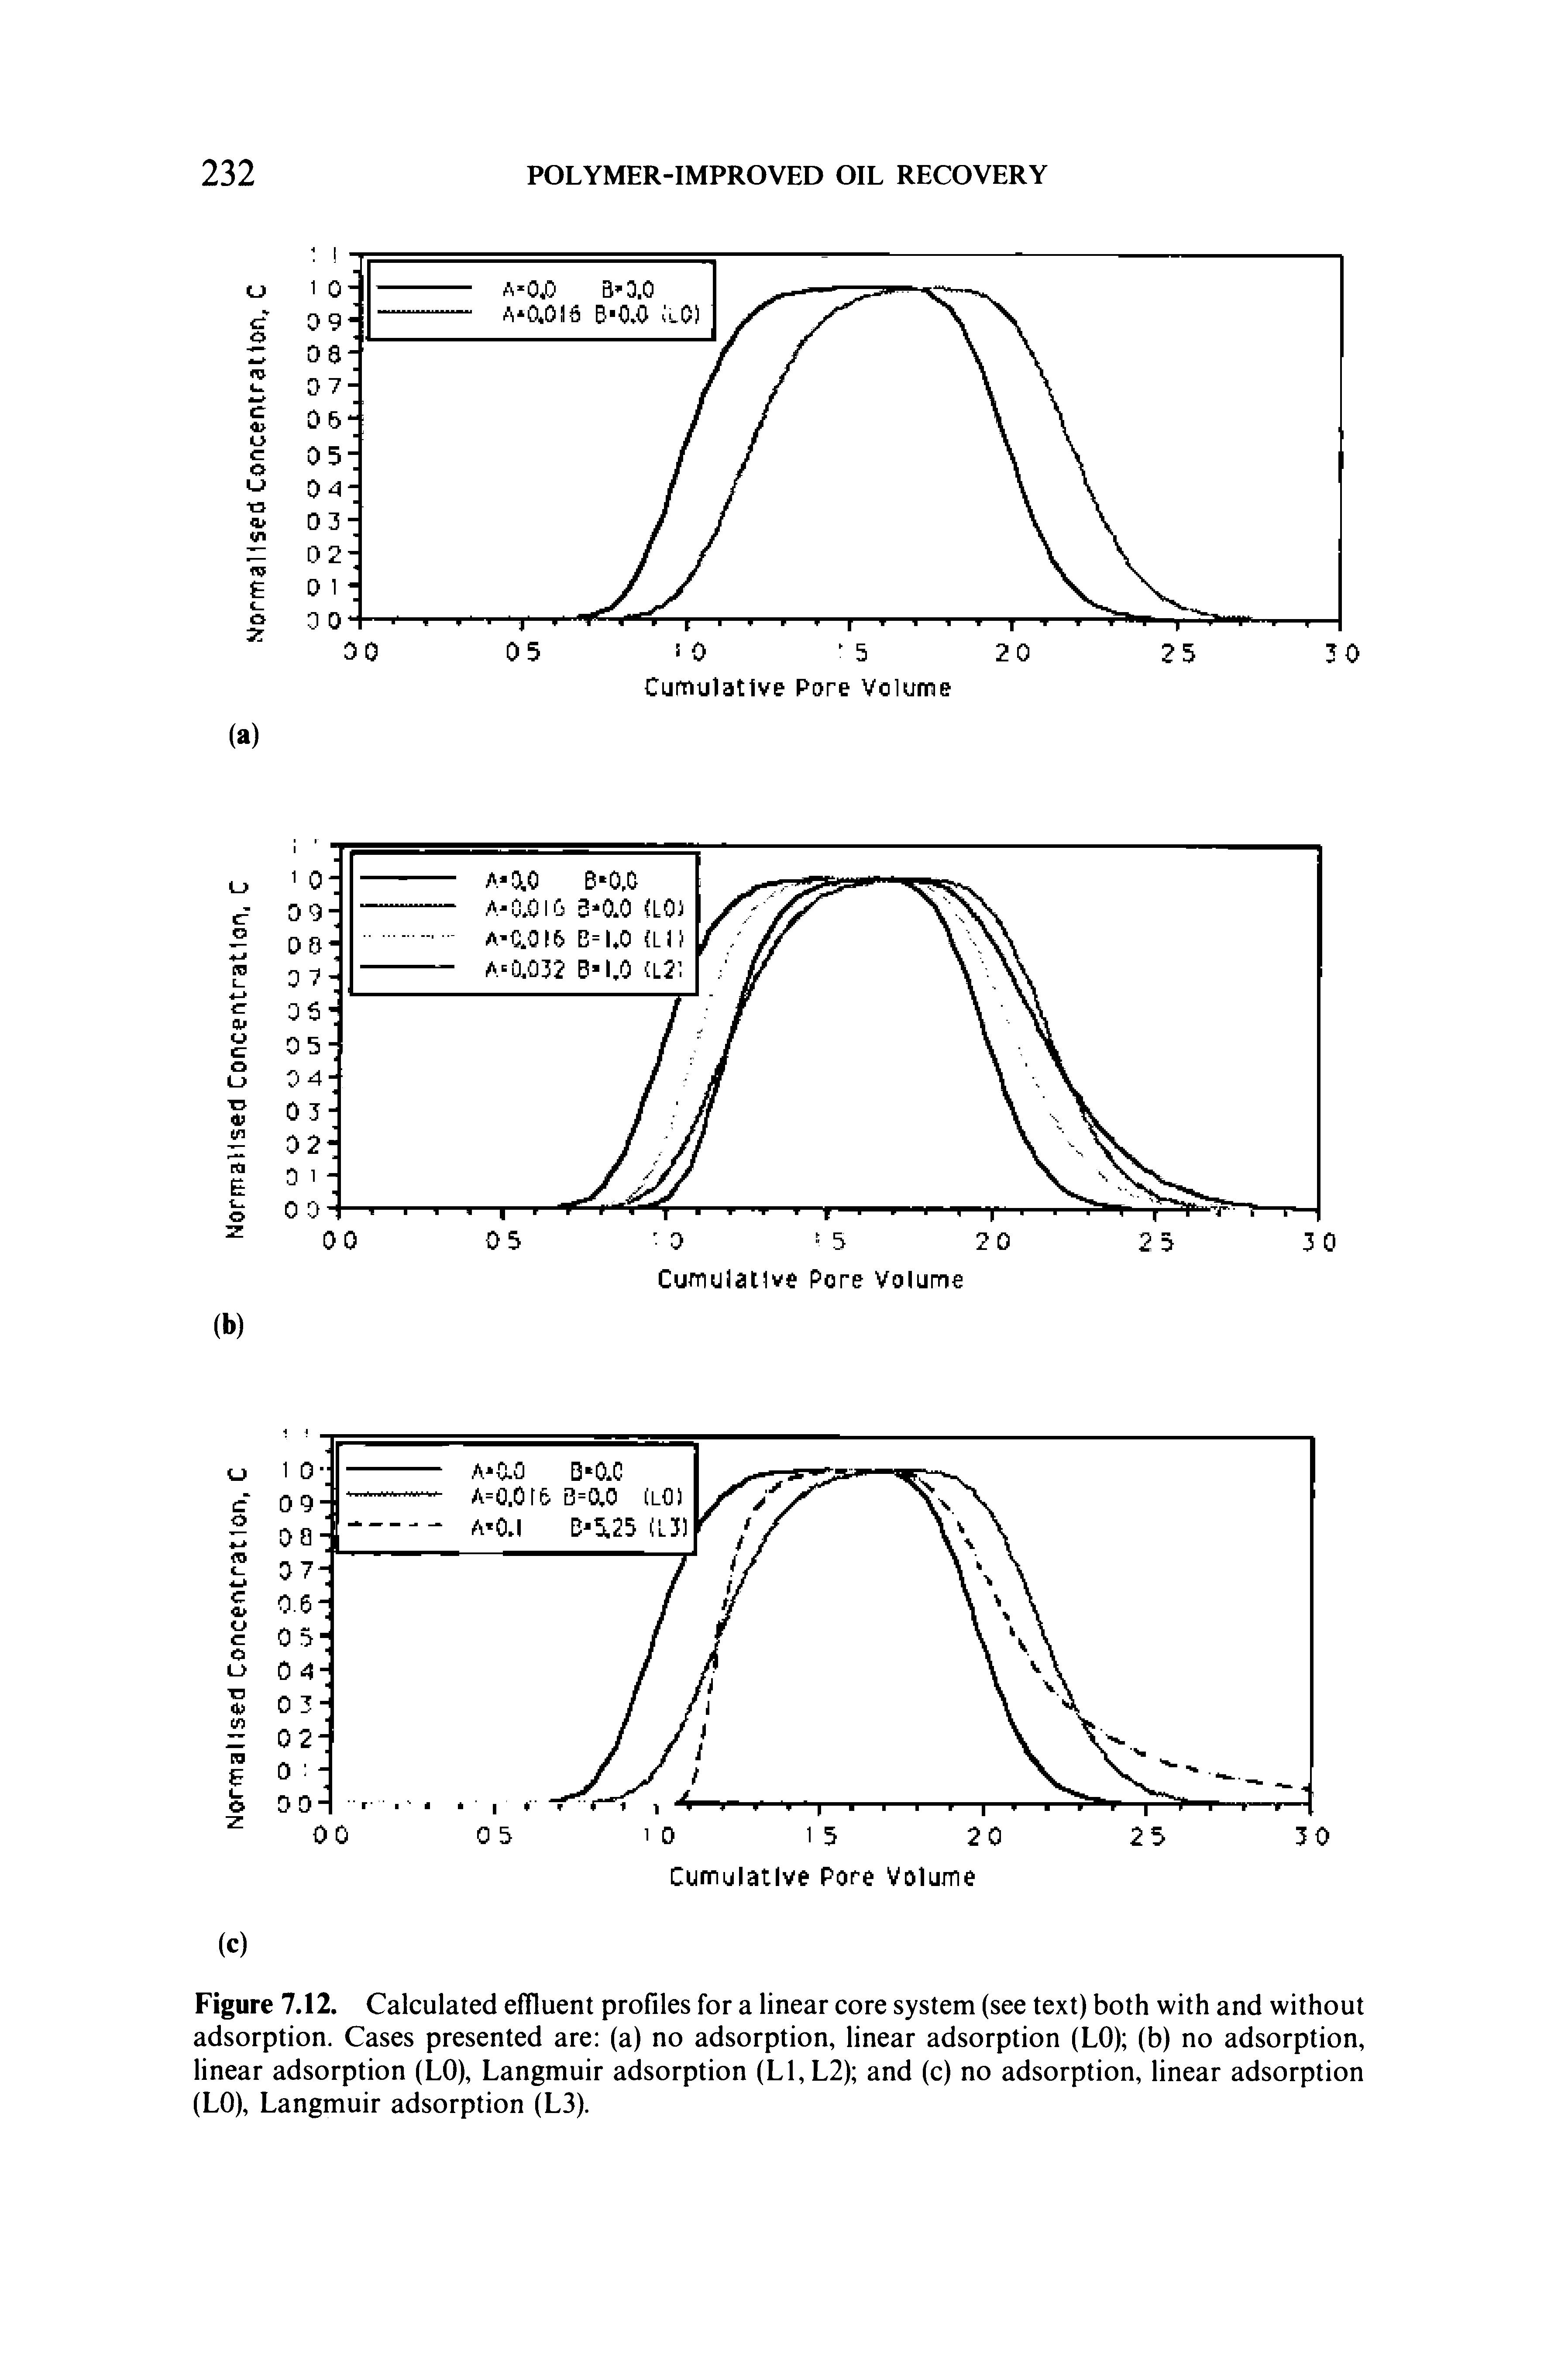 Figure 7.12. Calculated effluent profiles for a linear core system (see text) both with and without adsorption. Cases presented are (a) no adsorption, linear adsorption (LO) (b) no adsorption, linear adsorption (LO), Langmuir adsorption (L1,L2) and (c) no adsorption, linear adsorption (LO), Langmuir adsorption (L3).